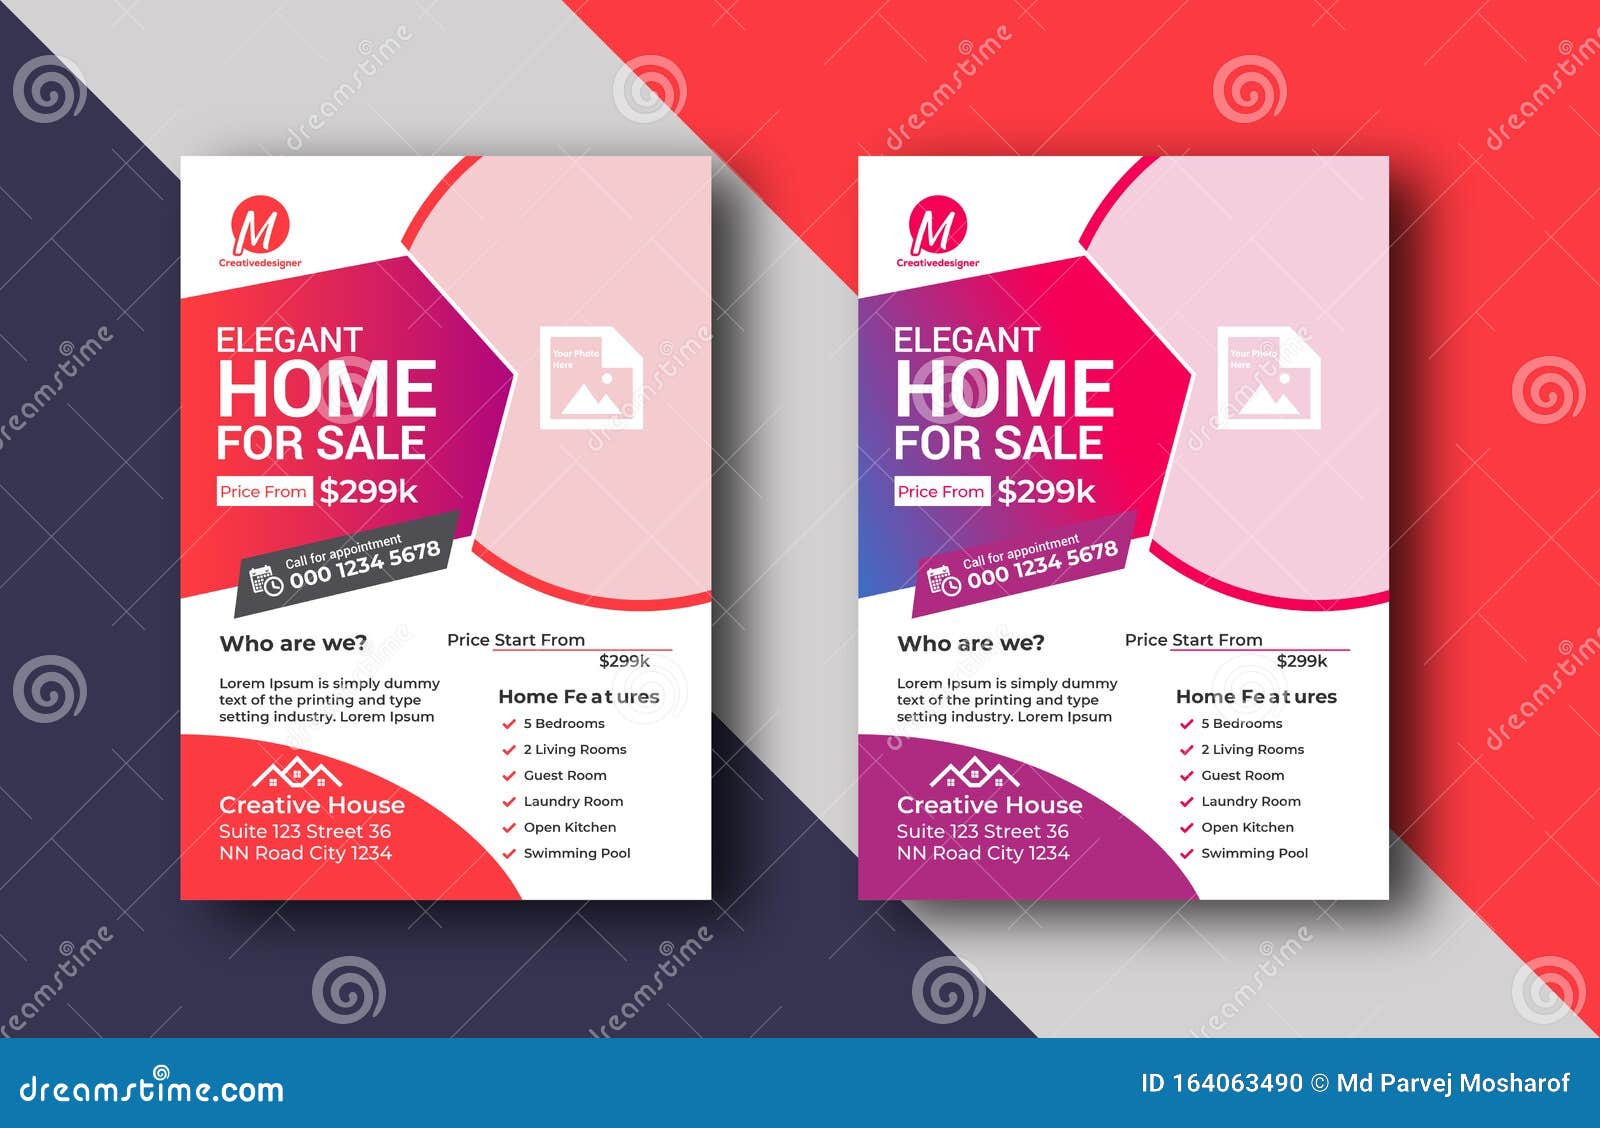 Creative Home for Sale Flyer Template Design Stock Illustration Pertaining To Adobe Illustrator Flyer Template